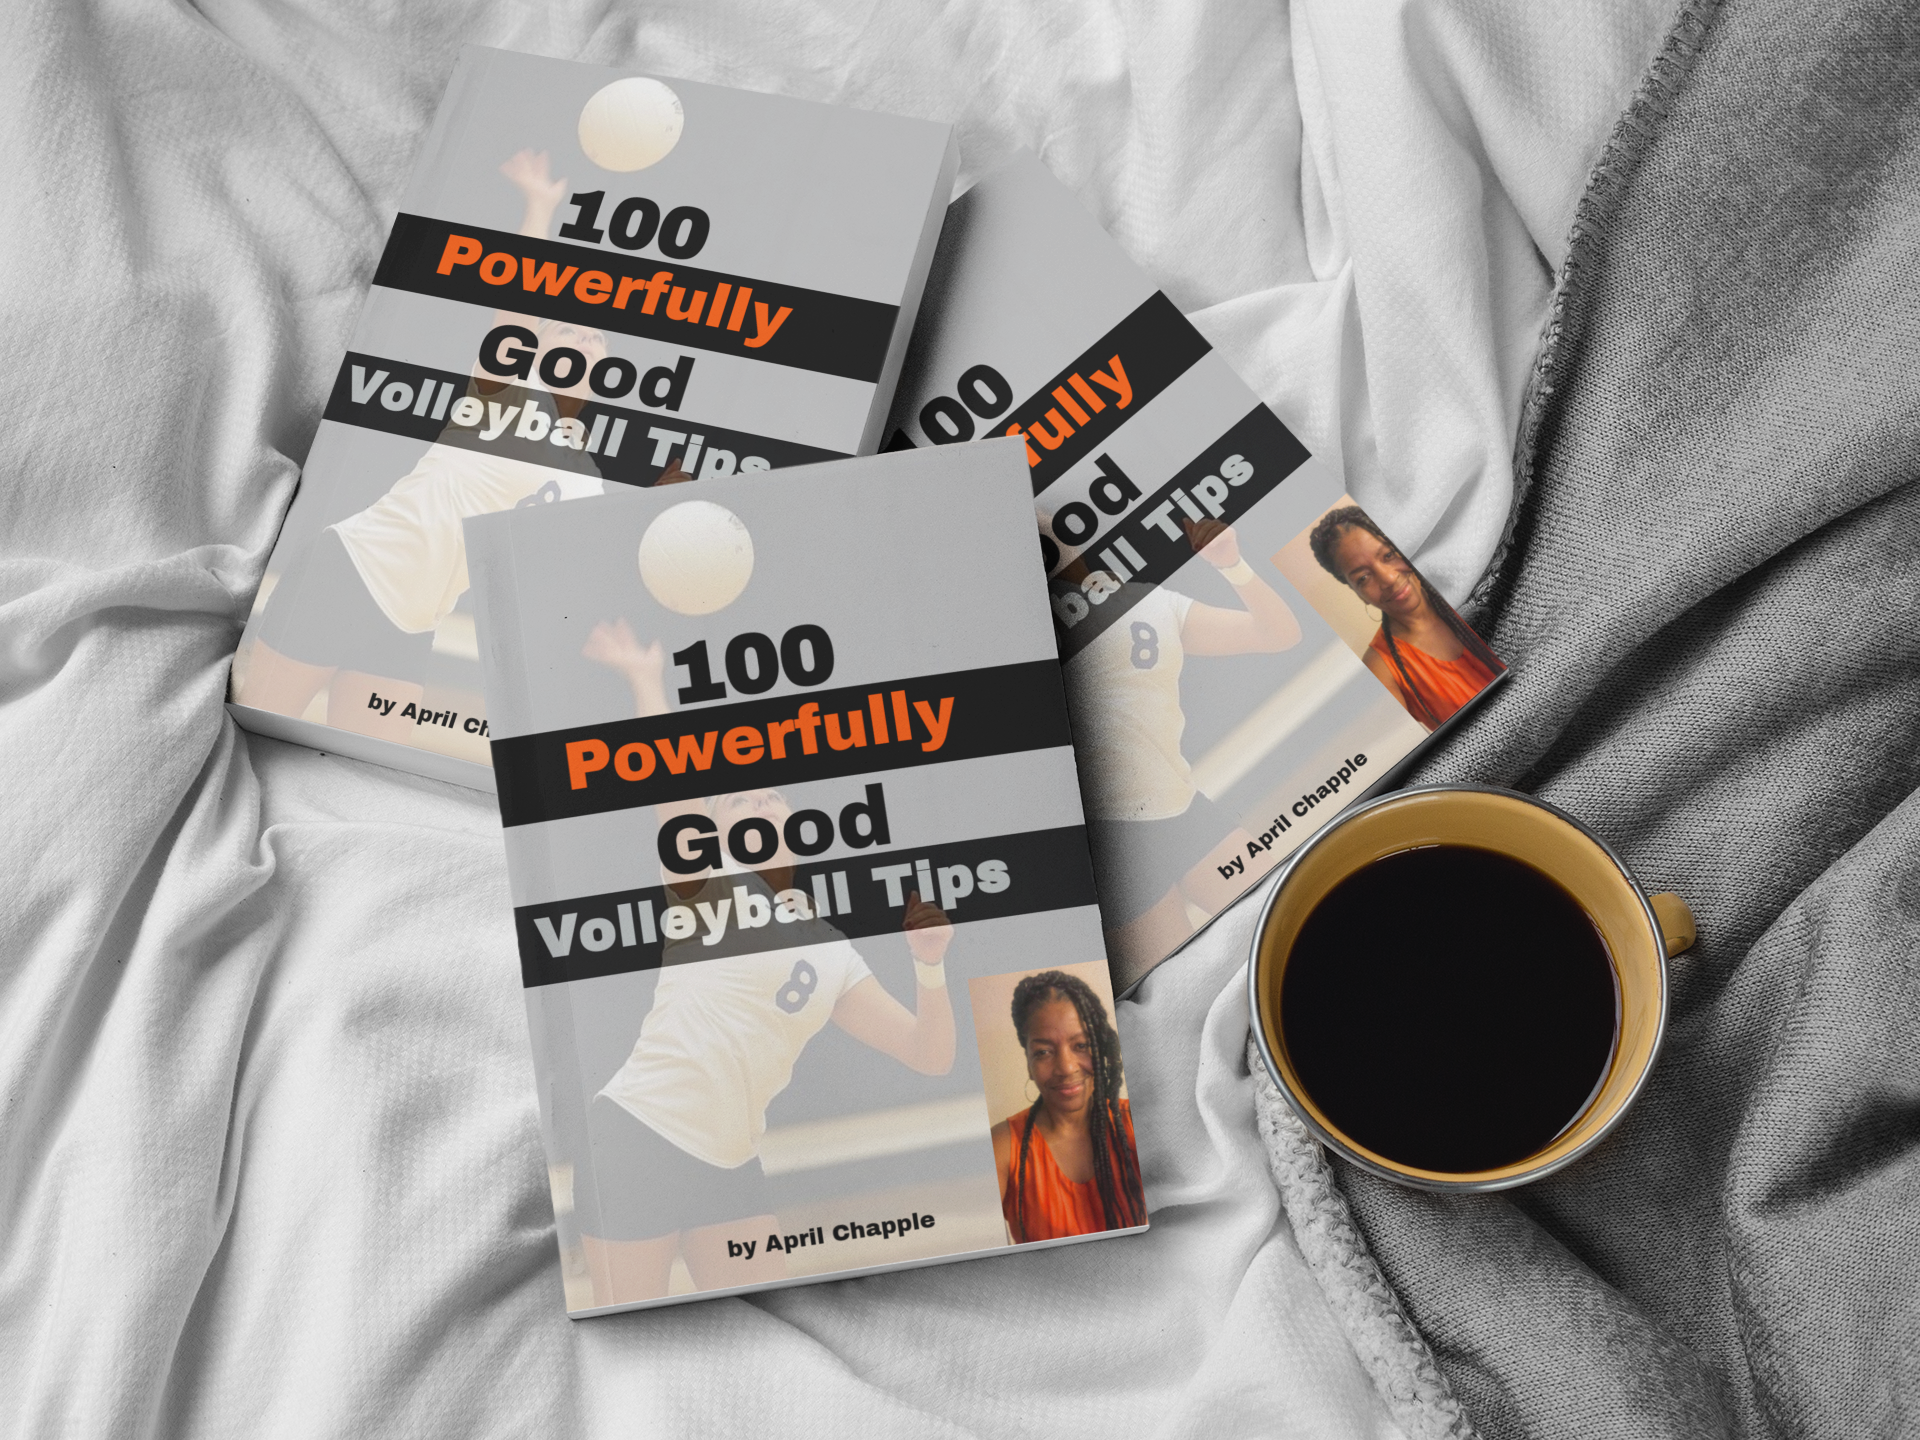 April Chapple releases a must read ebook "100 Powerfully Good Volleyball Tips" full of coaching tips for youth volleyball players with goals of improving fast!